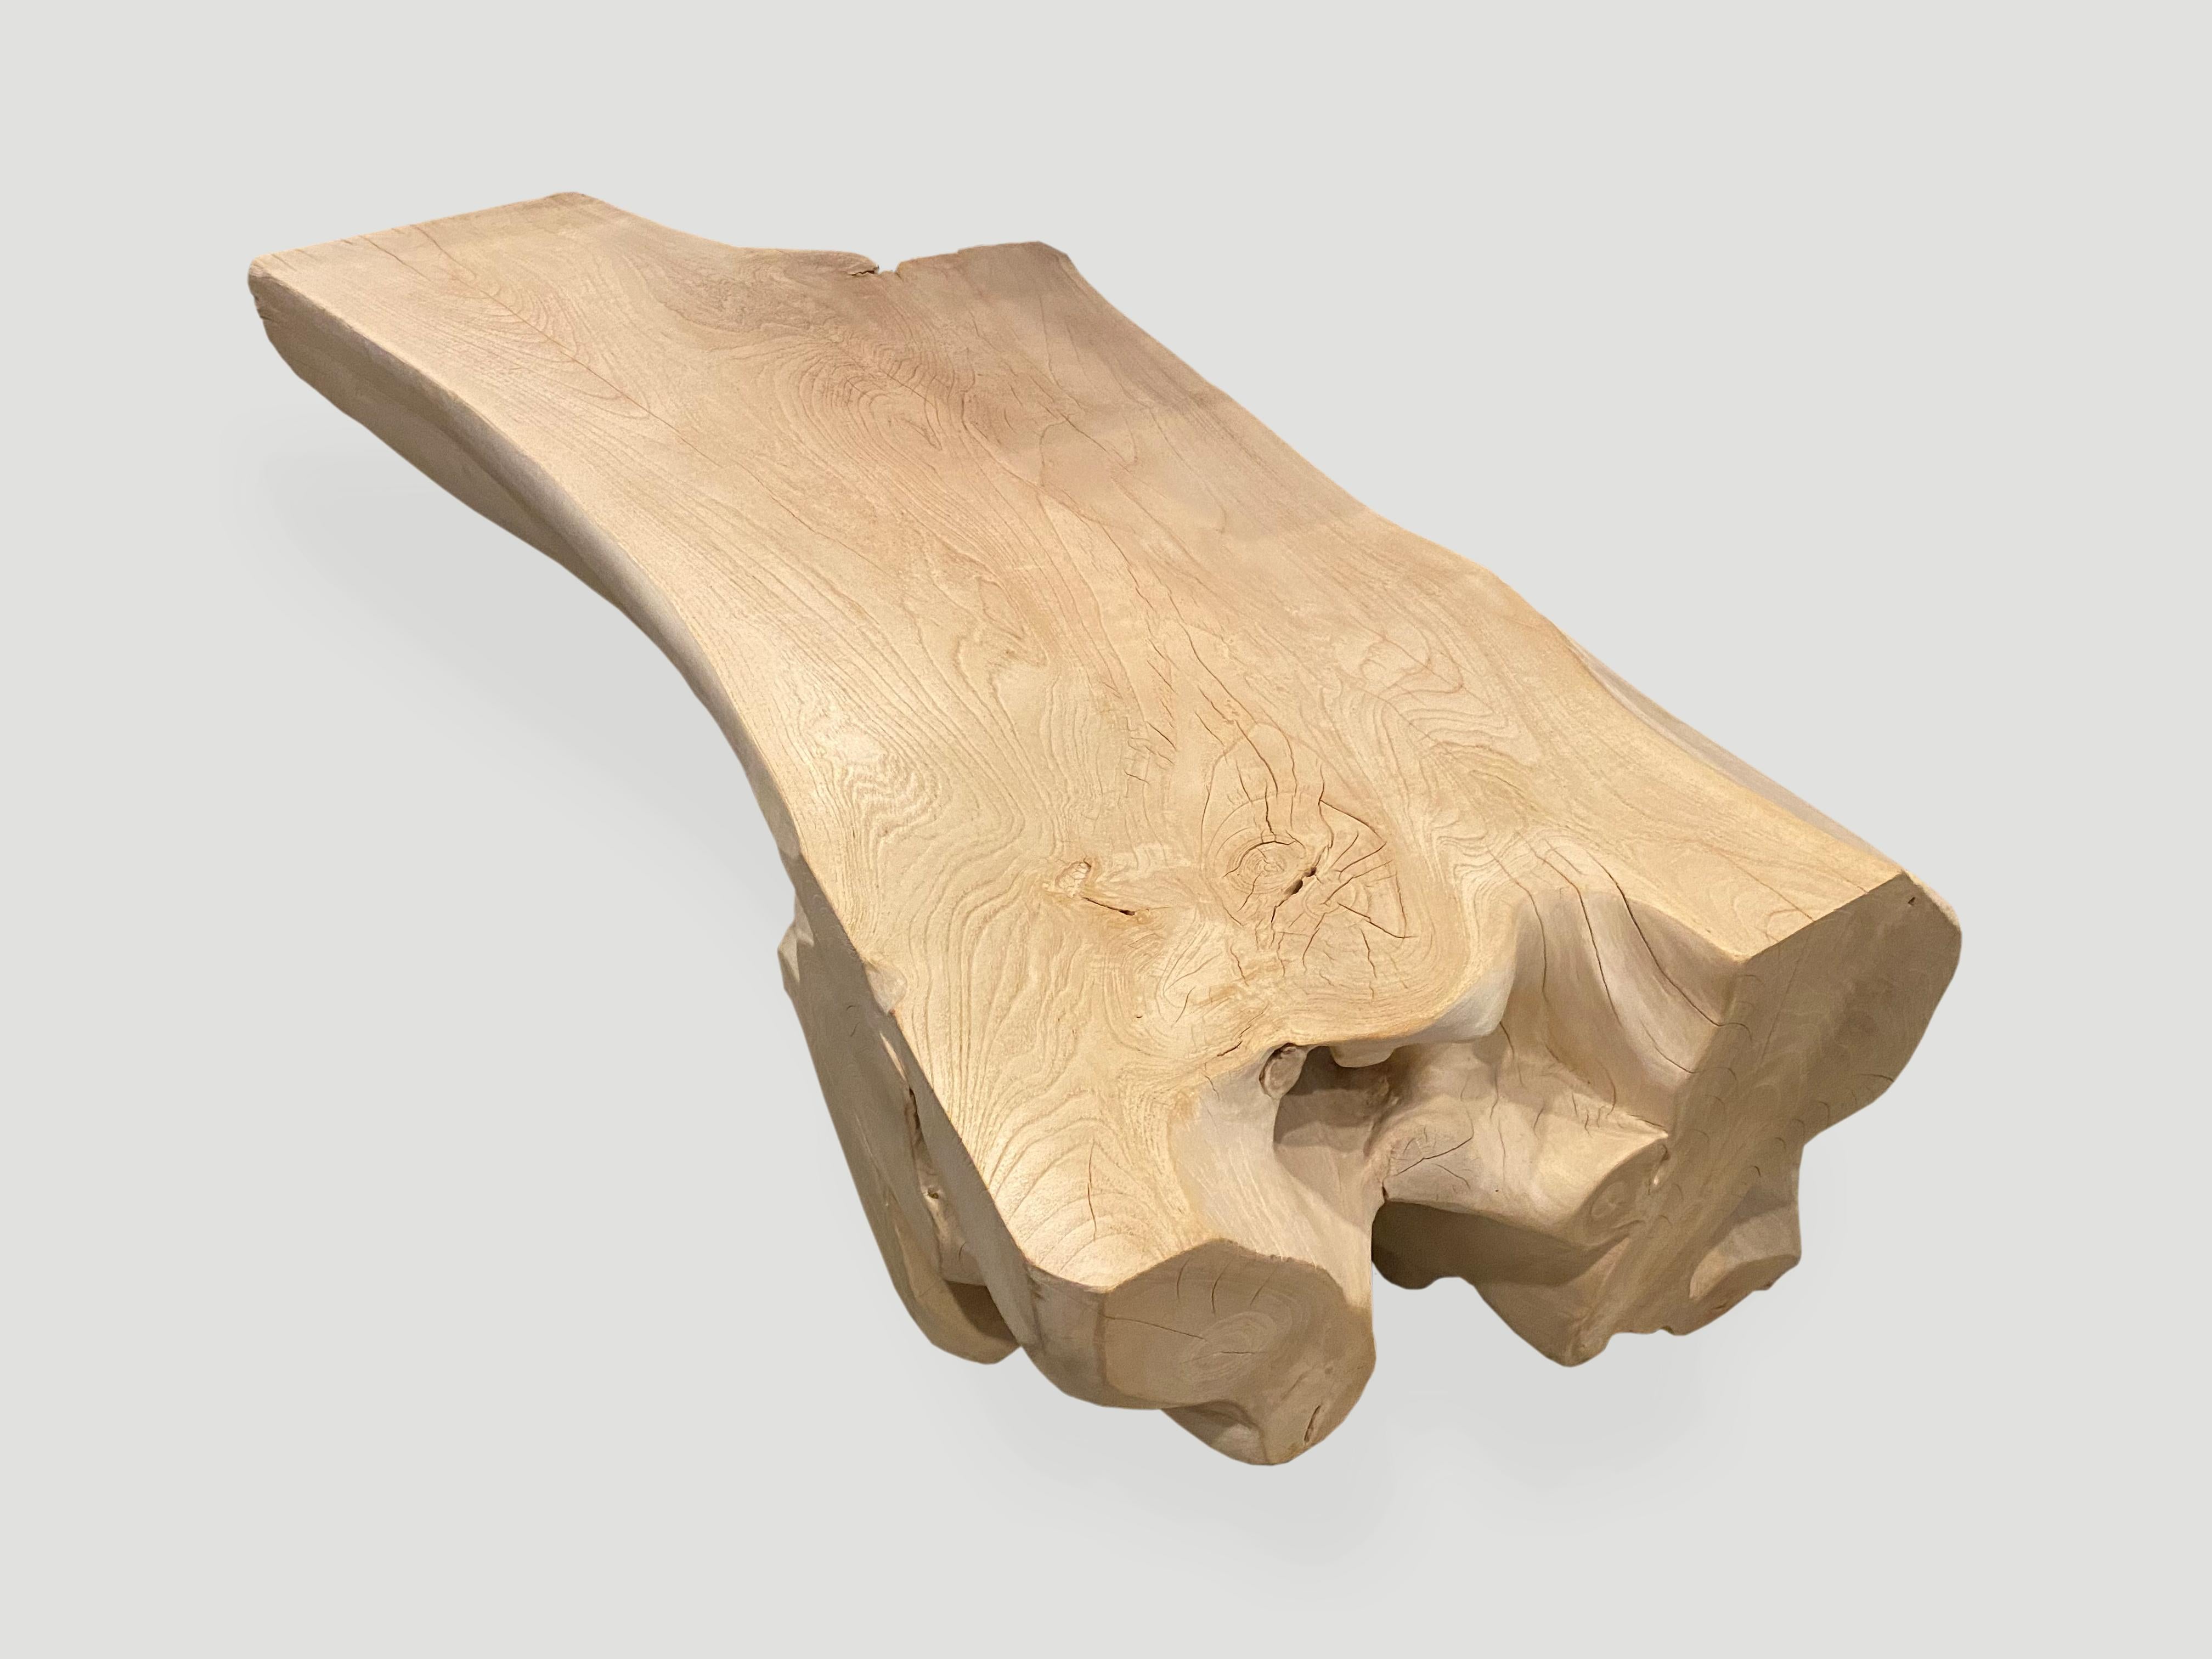 Impressive log style coffee table or bench made from a hundred year old reclaimed teak root. We added a light shellack on the top section. Organic is the new modern. Custom sizes available. All one of a kind.

The St. Barts Collection features an